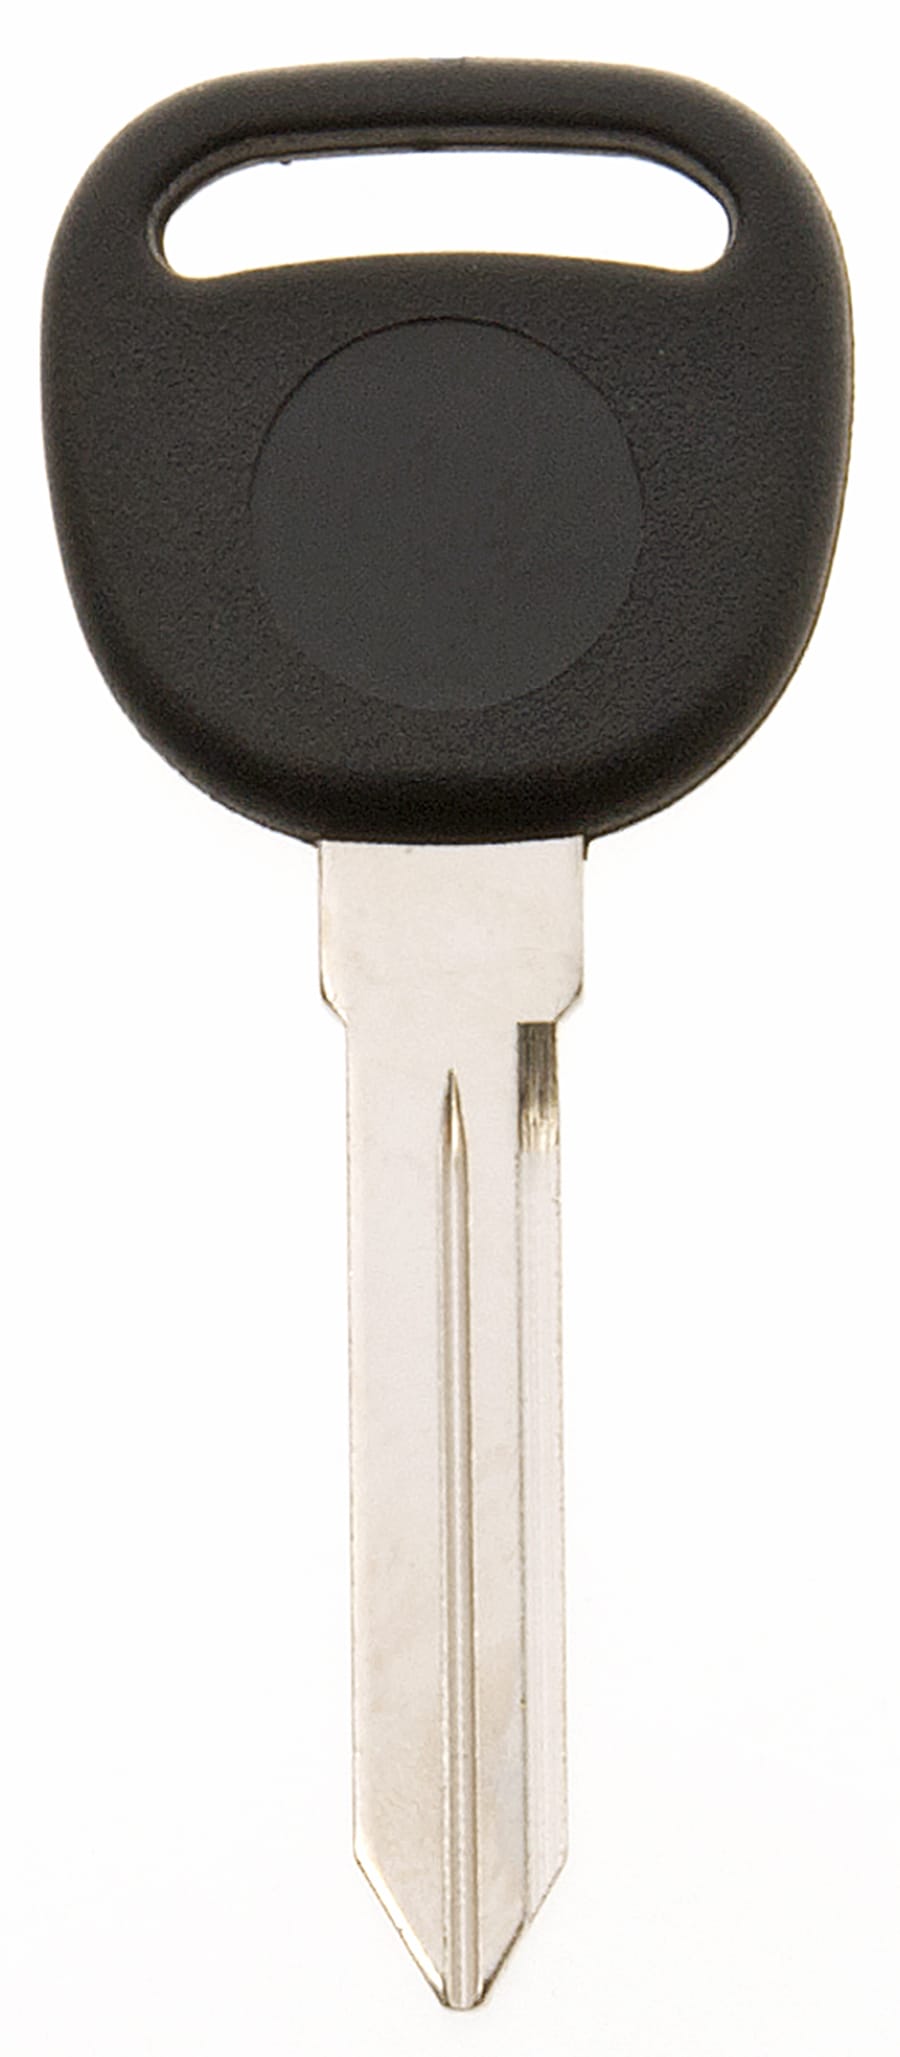 Hy-Ko Products Silver Chip Brass Automotive Key Blank in the Key Blanks ...